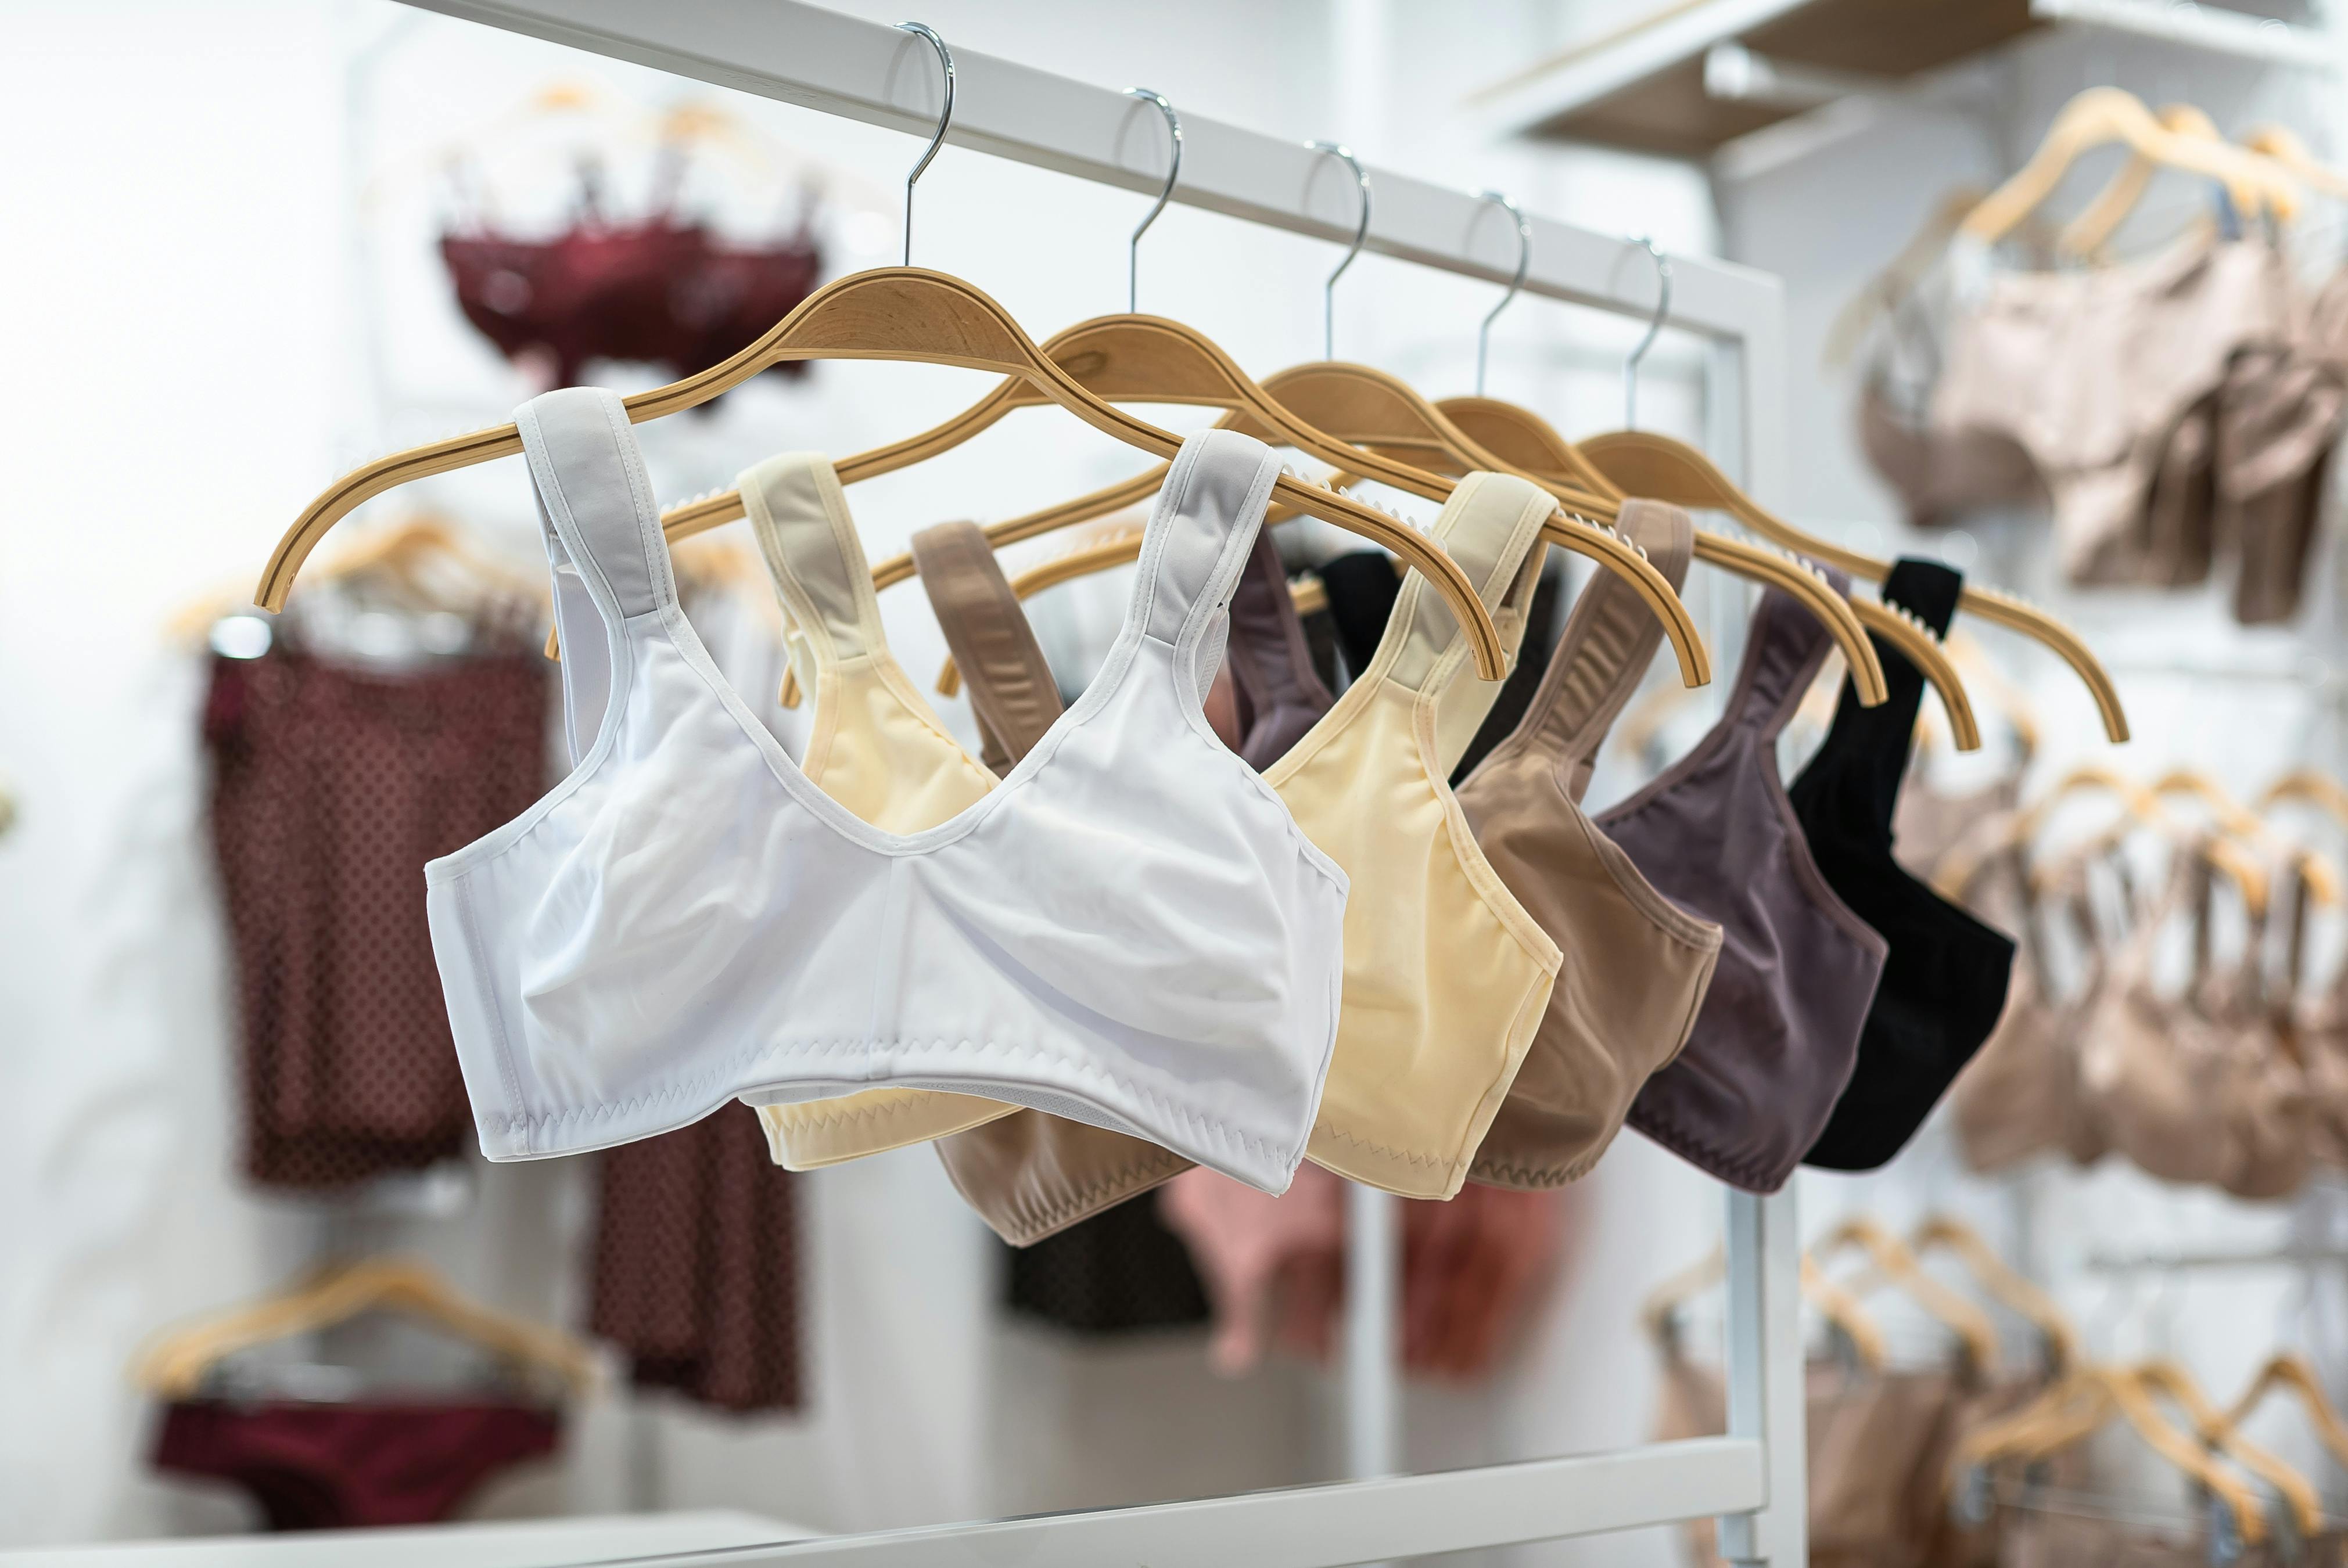 Womens underwear is hanging on store hangers. Womens bras for sale in the  market. A variety of bra hanging in the underwear store. Advertising, sale,  fashion concept. Stock Photo by ©kay4yk180718@gmail.com 332277746